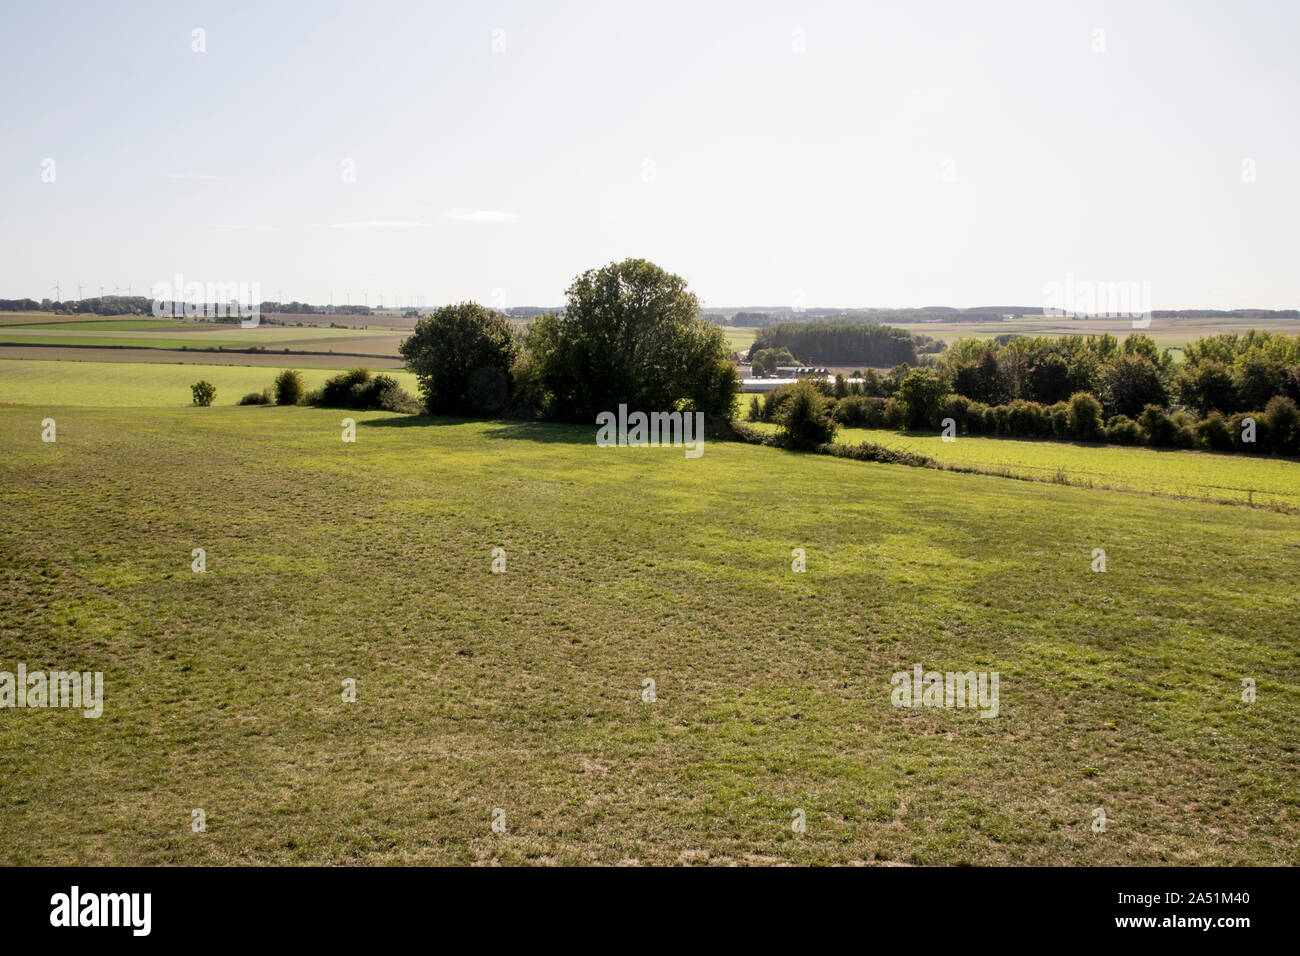 Site of Battlefield, Crecy, Crecy-en-Ponthieu, Picardy, France Stock Photo